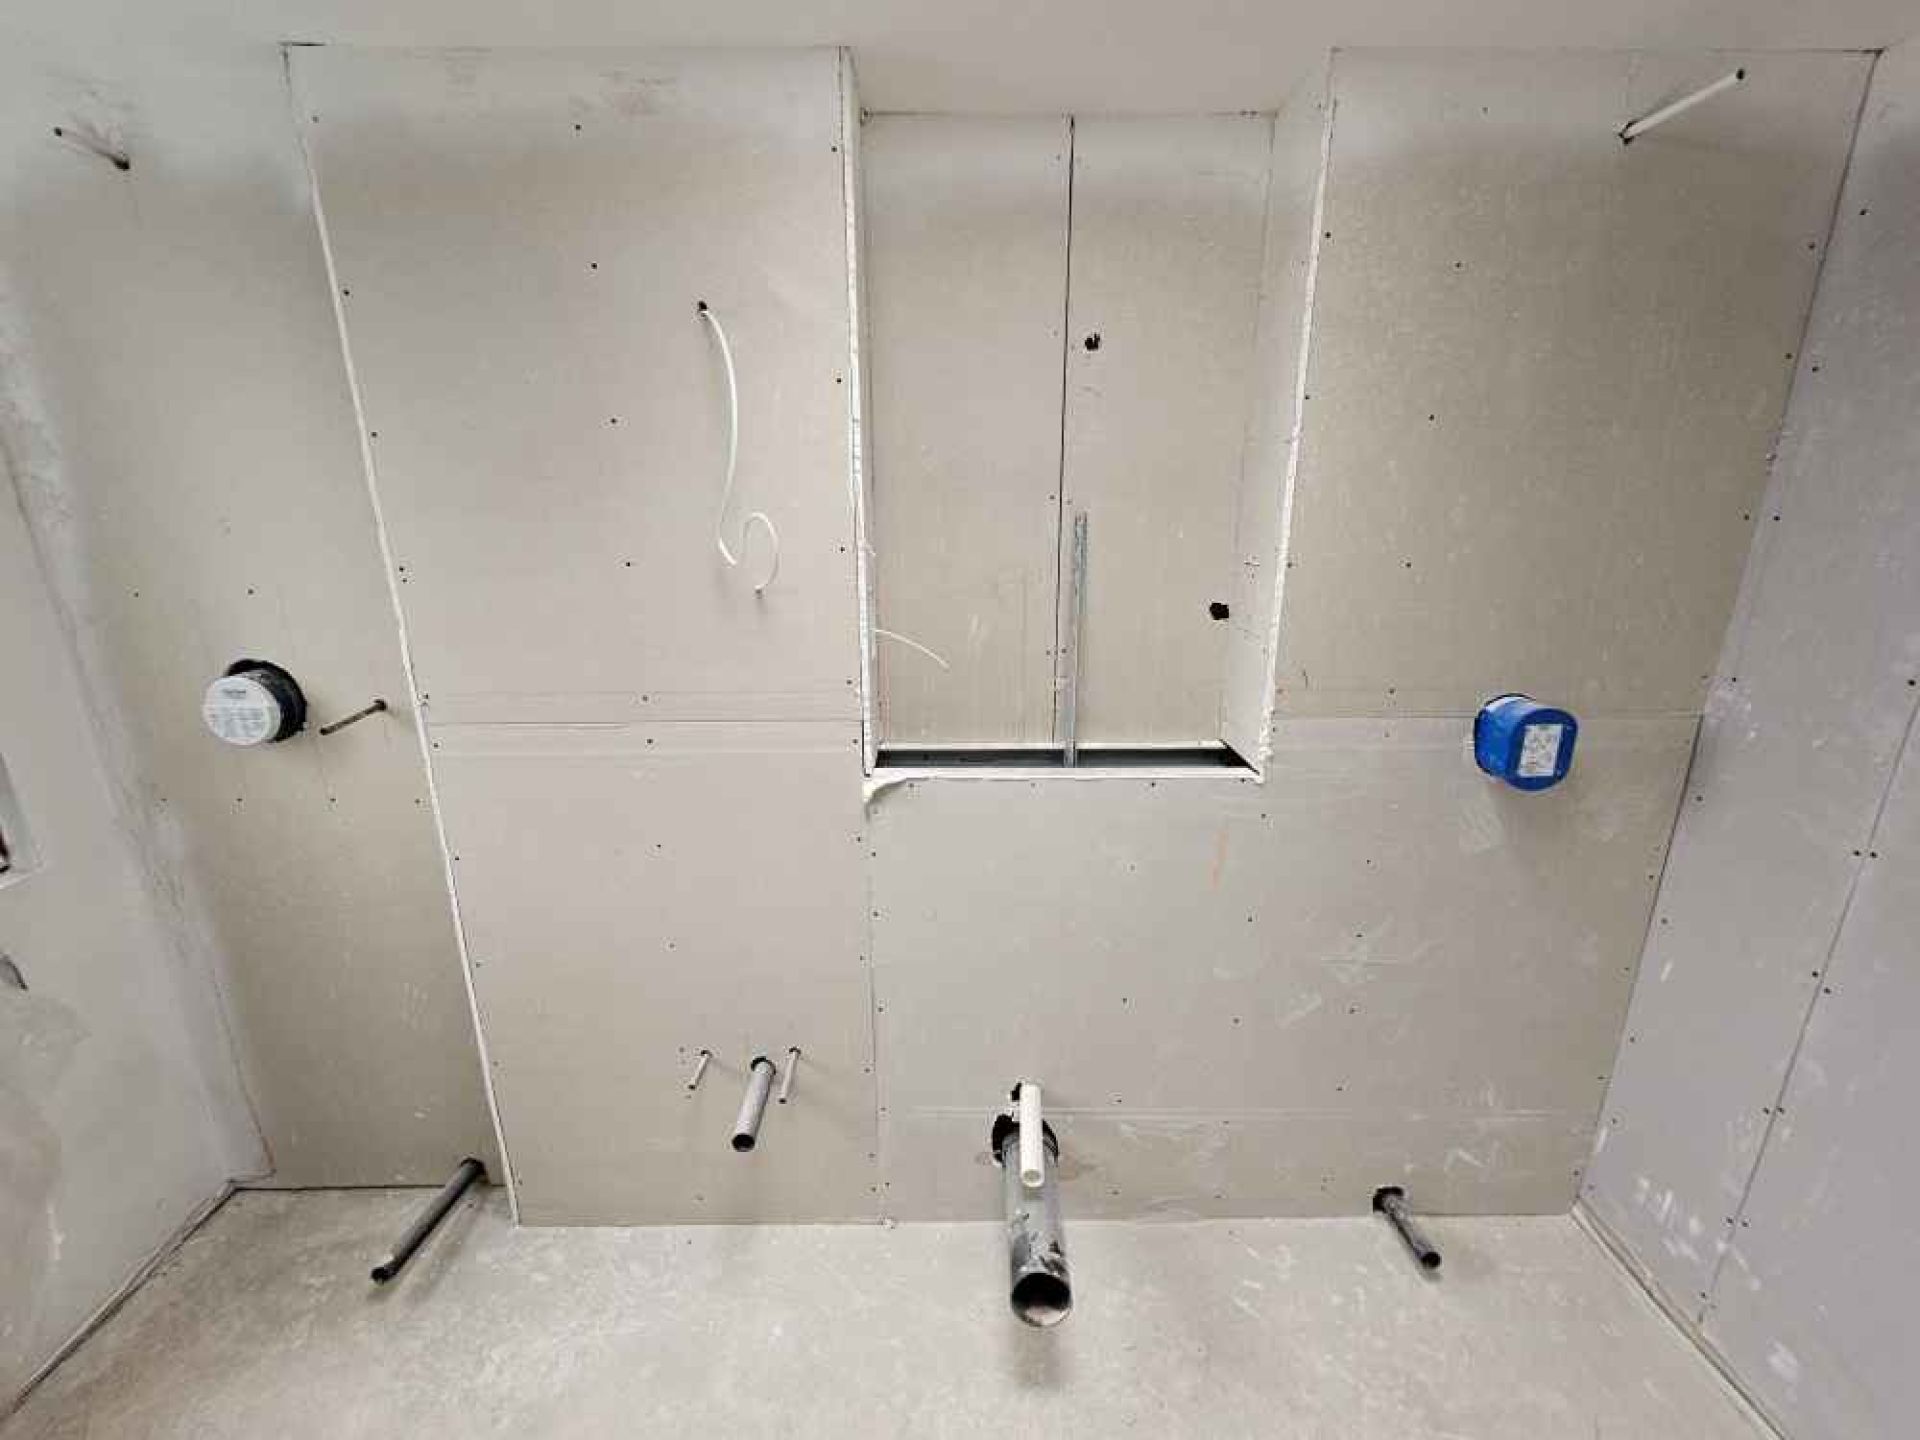 Shower area during construction.